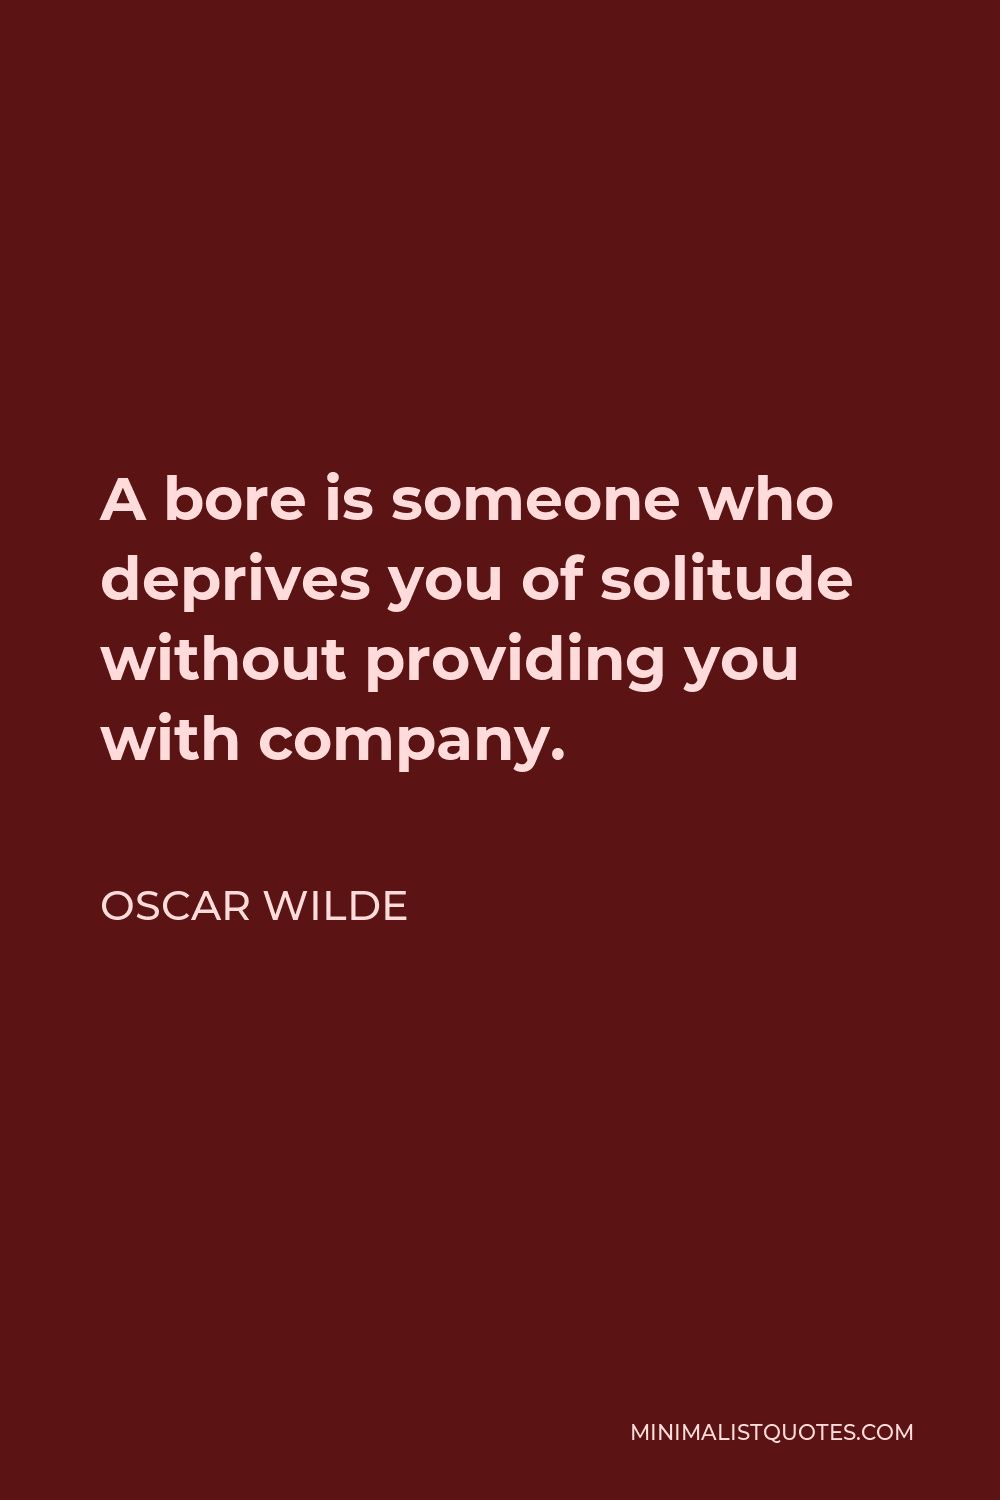 Oscar Wilde Quote - A bore is someone who deprives you of solitude without providing you with company.